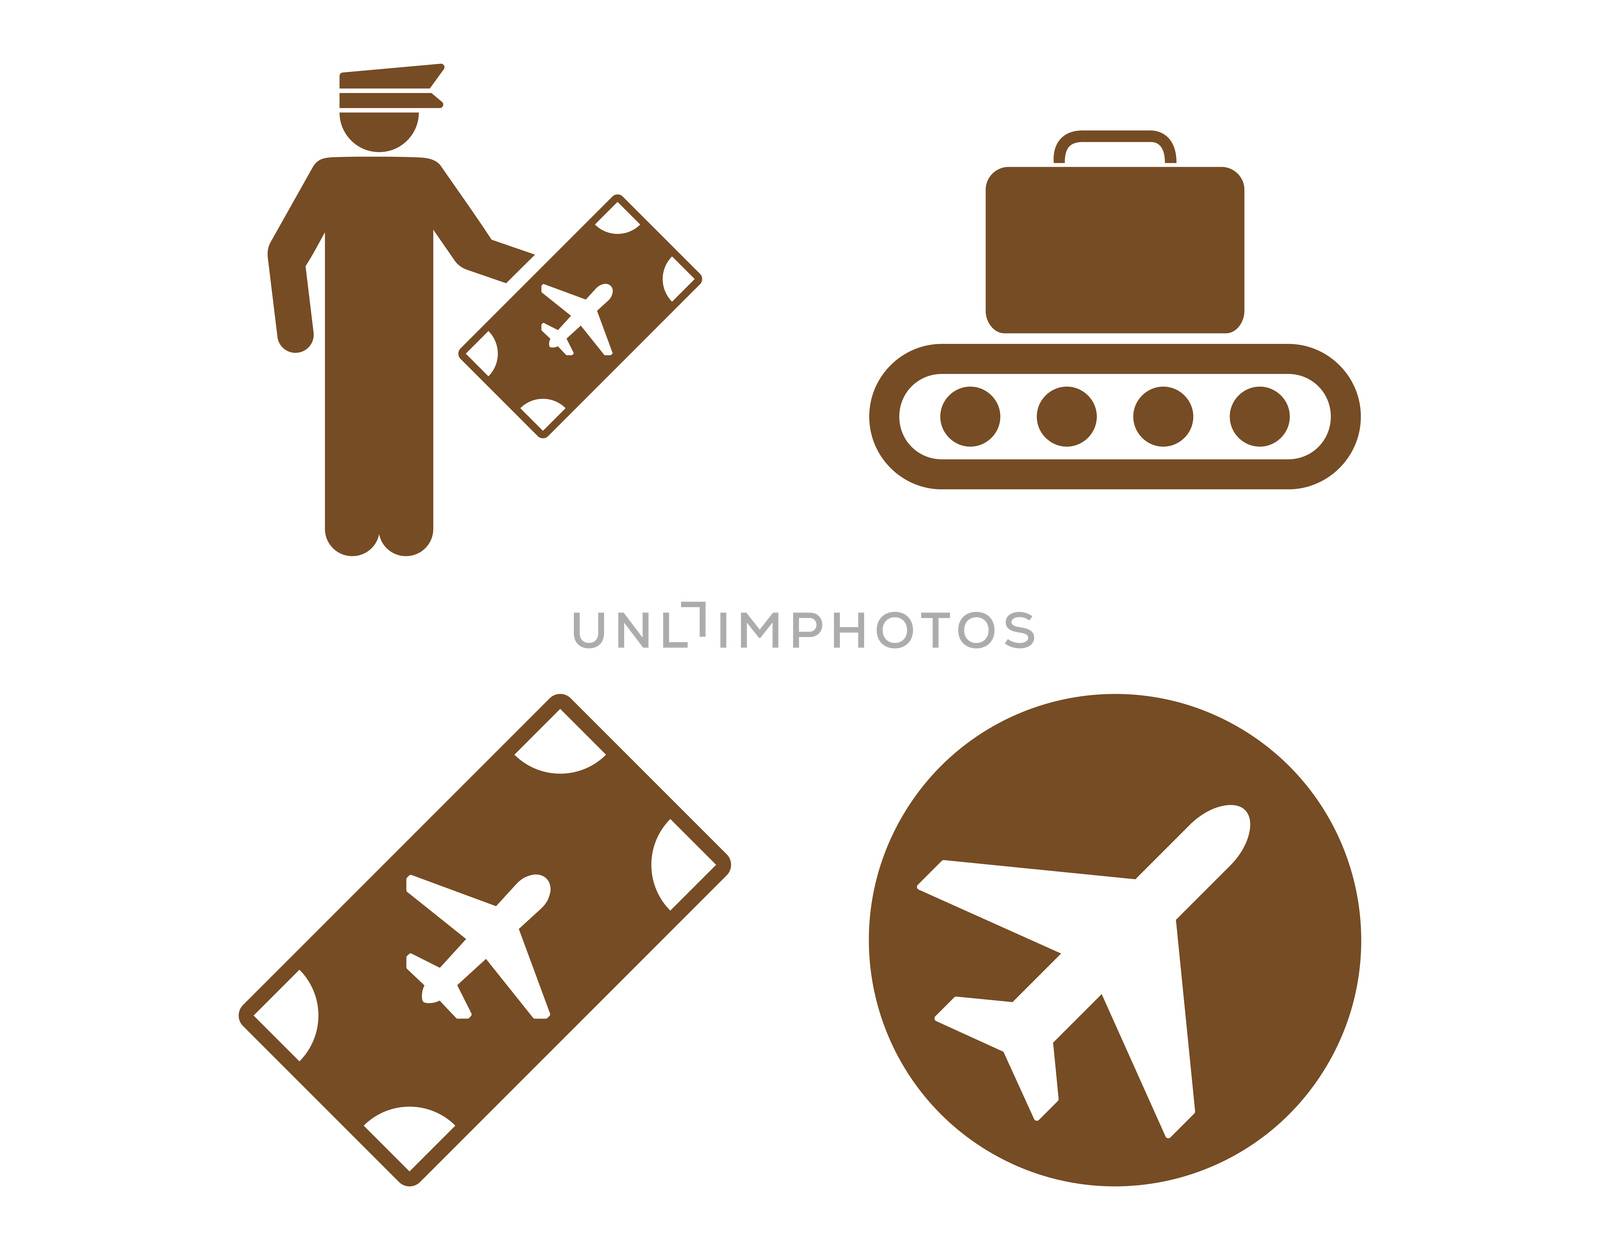 Aviation Icon Set. These flat icons use brown color. Raster images are isolated on a white background.